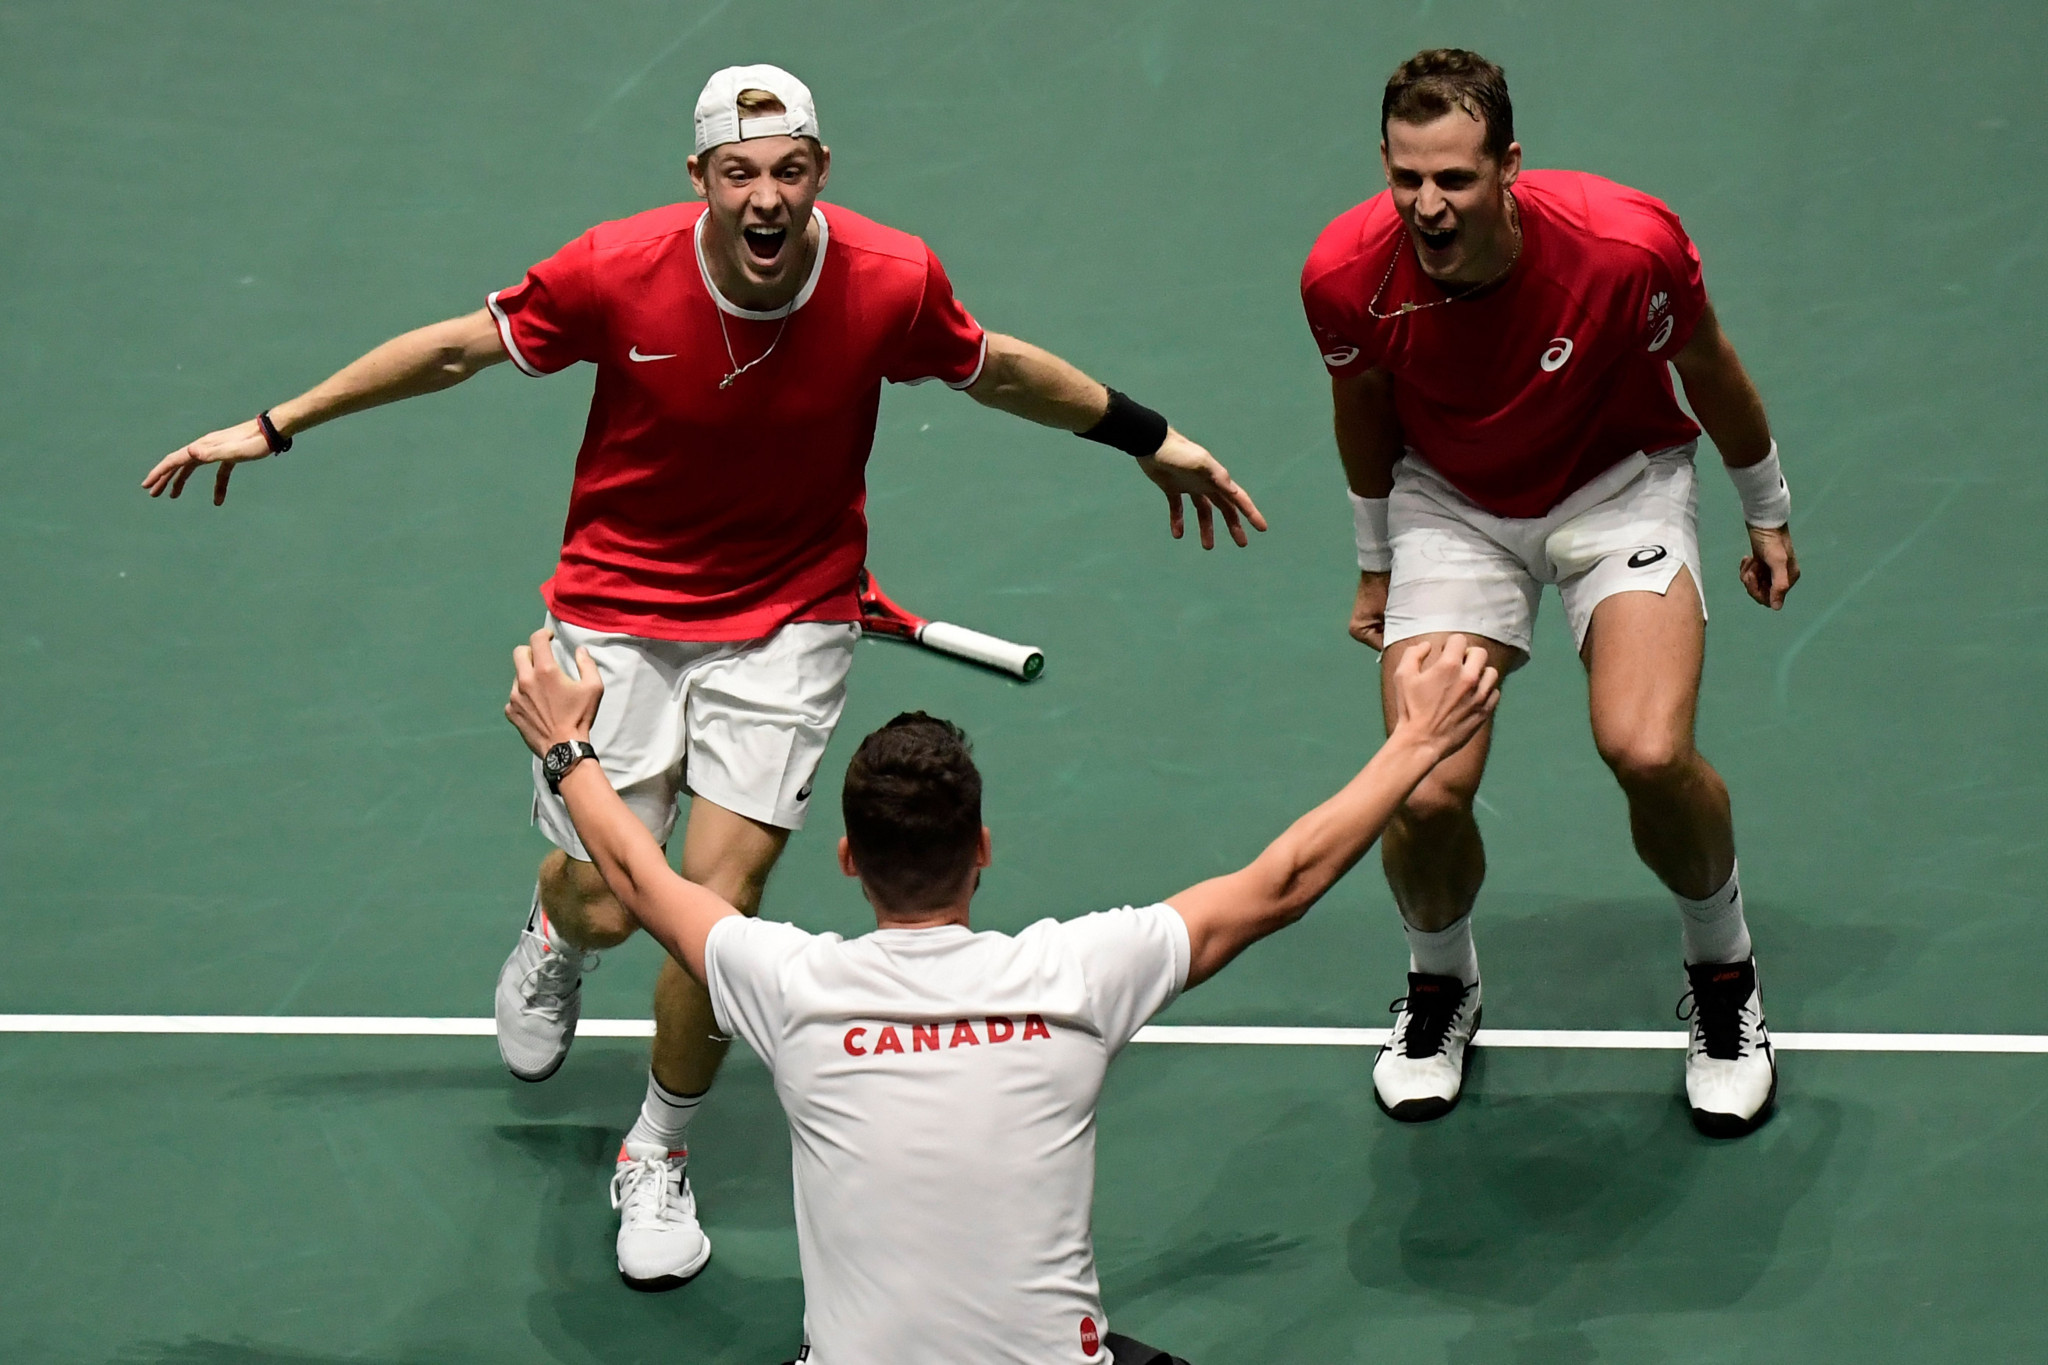 Canada secured their place in the last four of the Davis Cup Finals after beating Australia 2-1 in Madrid tonight ©Getty Images